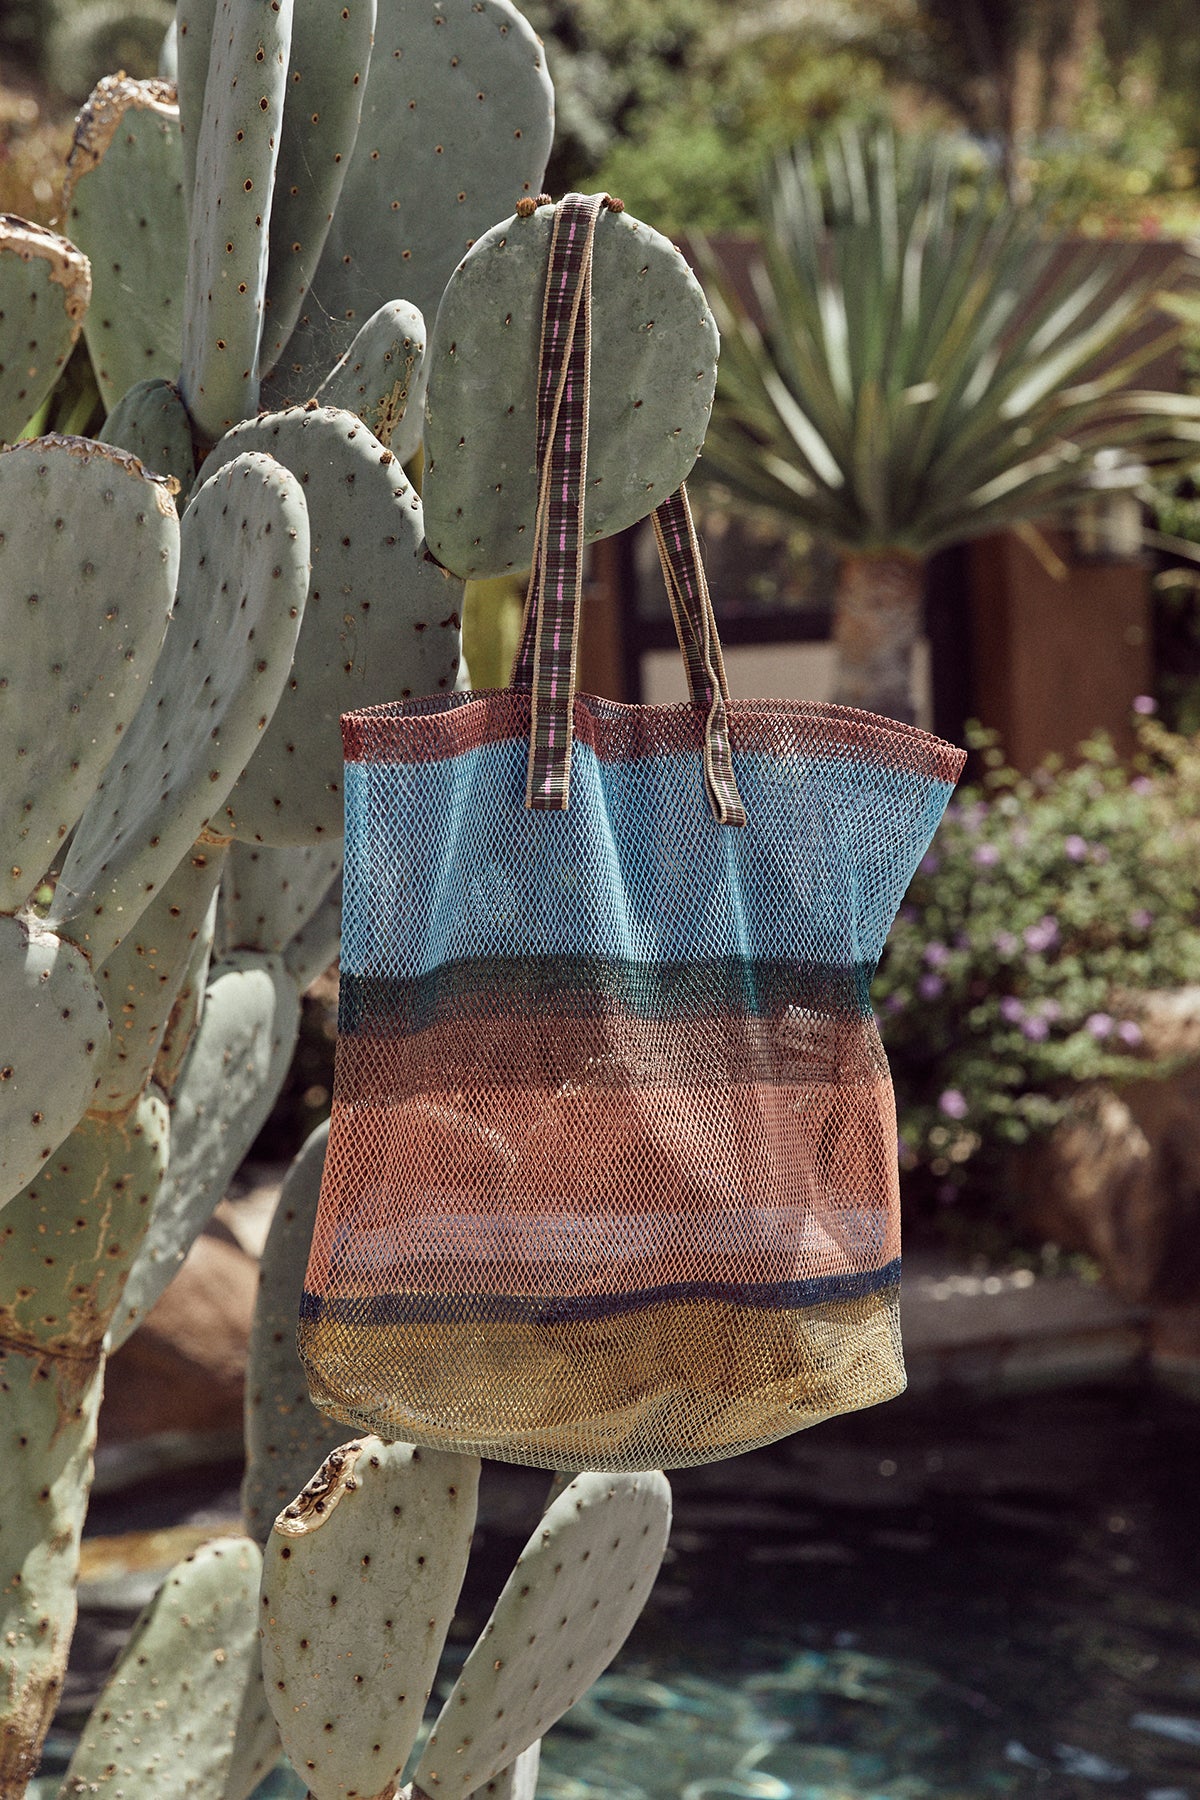 Large Striped Mesh Tote by Epice in Coral Hanging From Cactus.-24774612975809